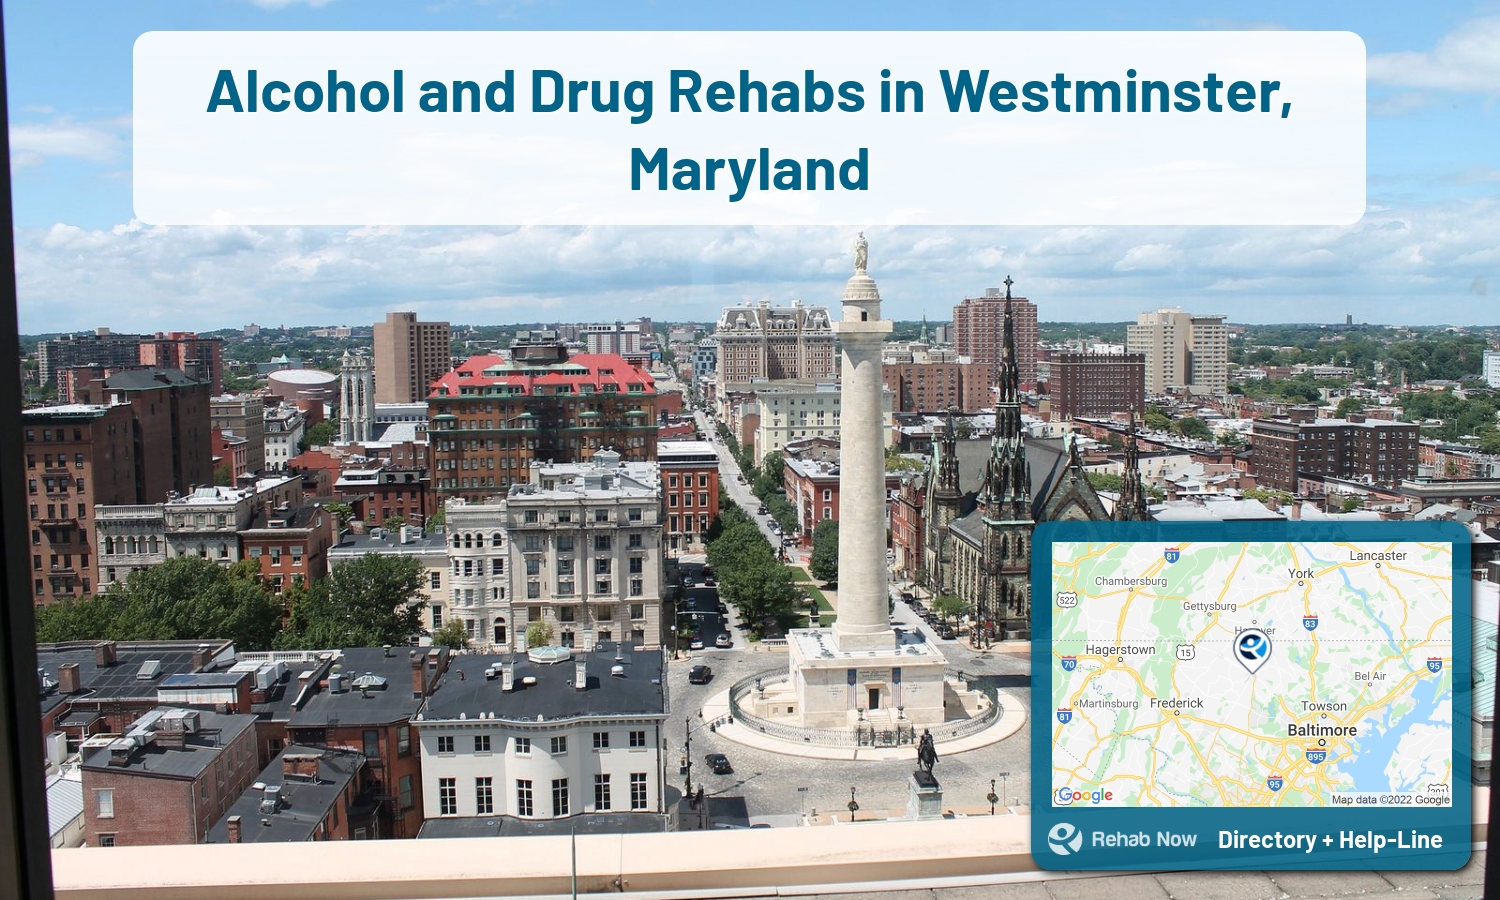 Westminster, MD Treatment Centers. Find drug rehab in Westminster, Maryland, or detox and treatment programs. Get the right help now!